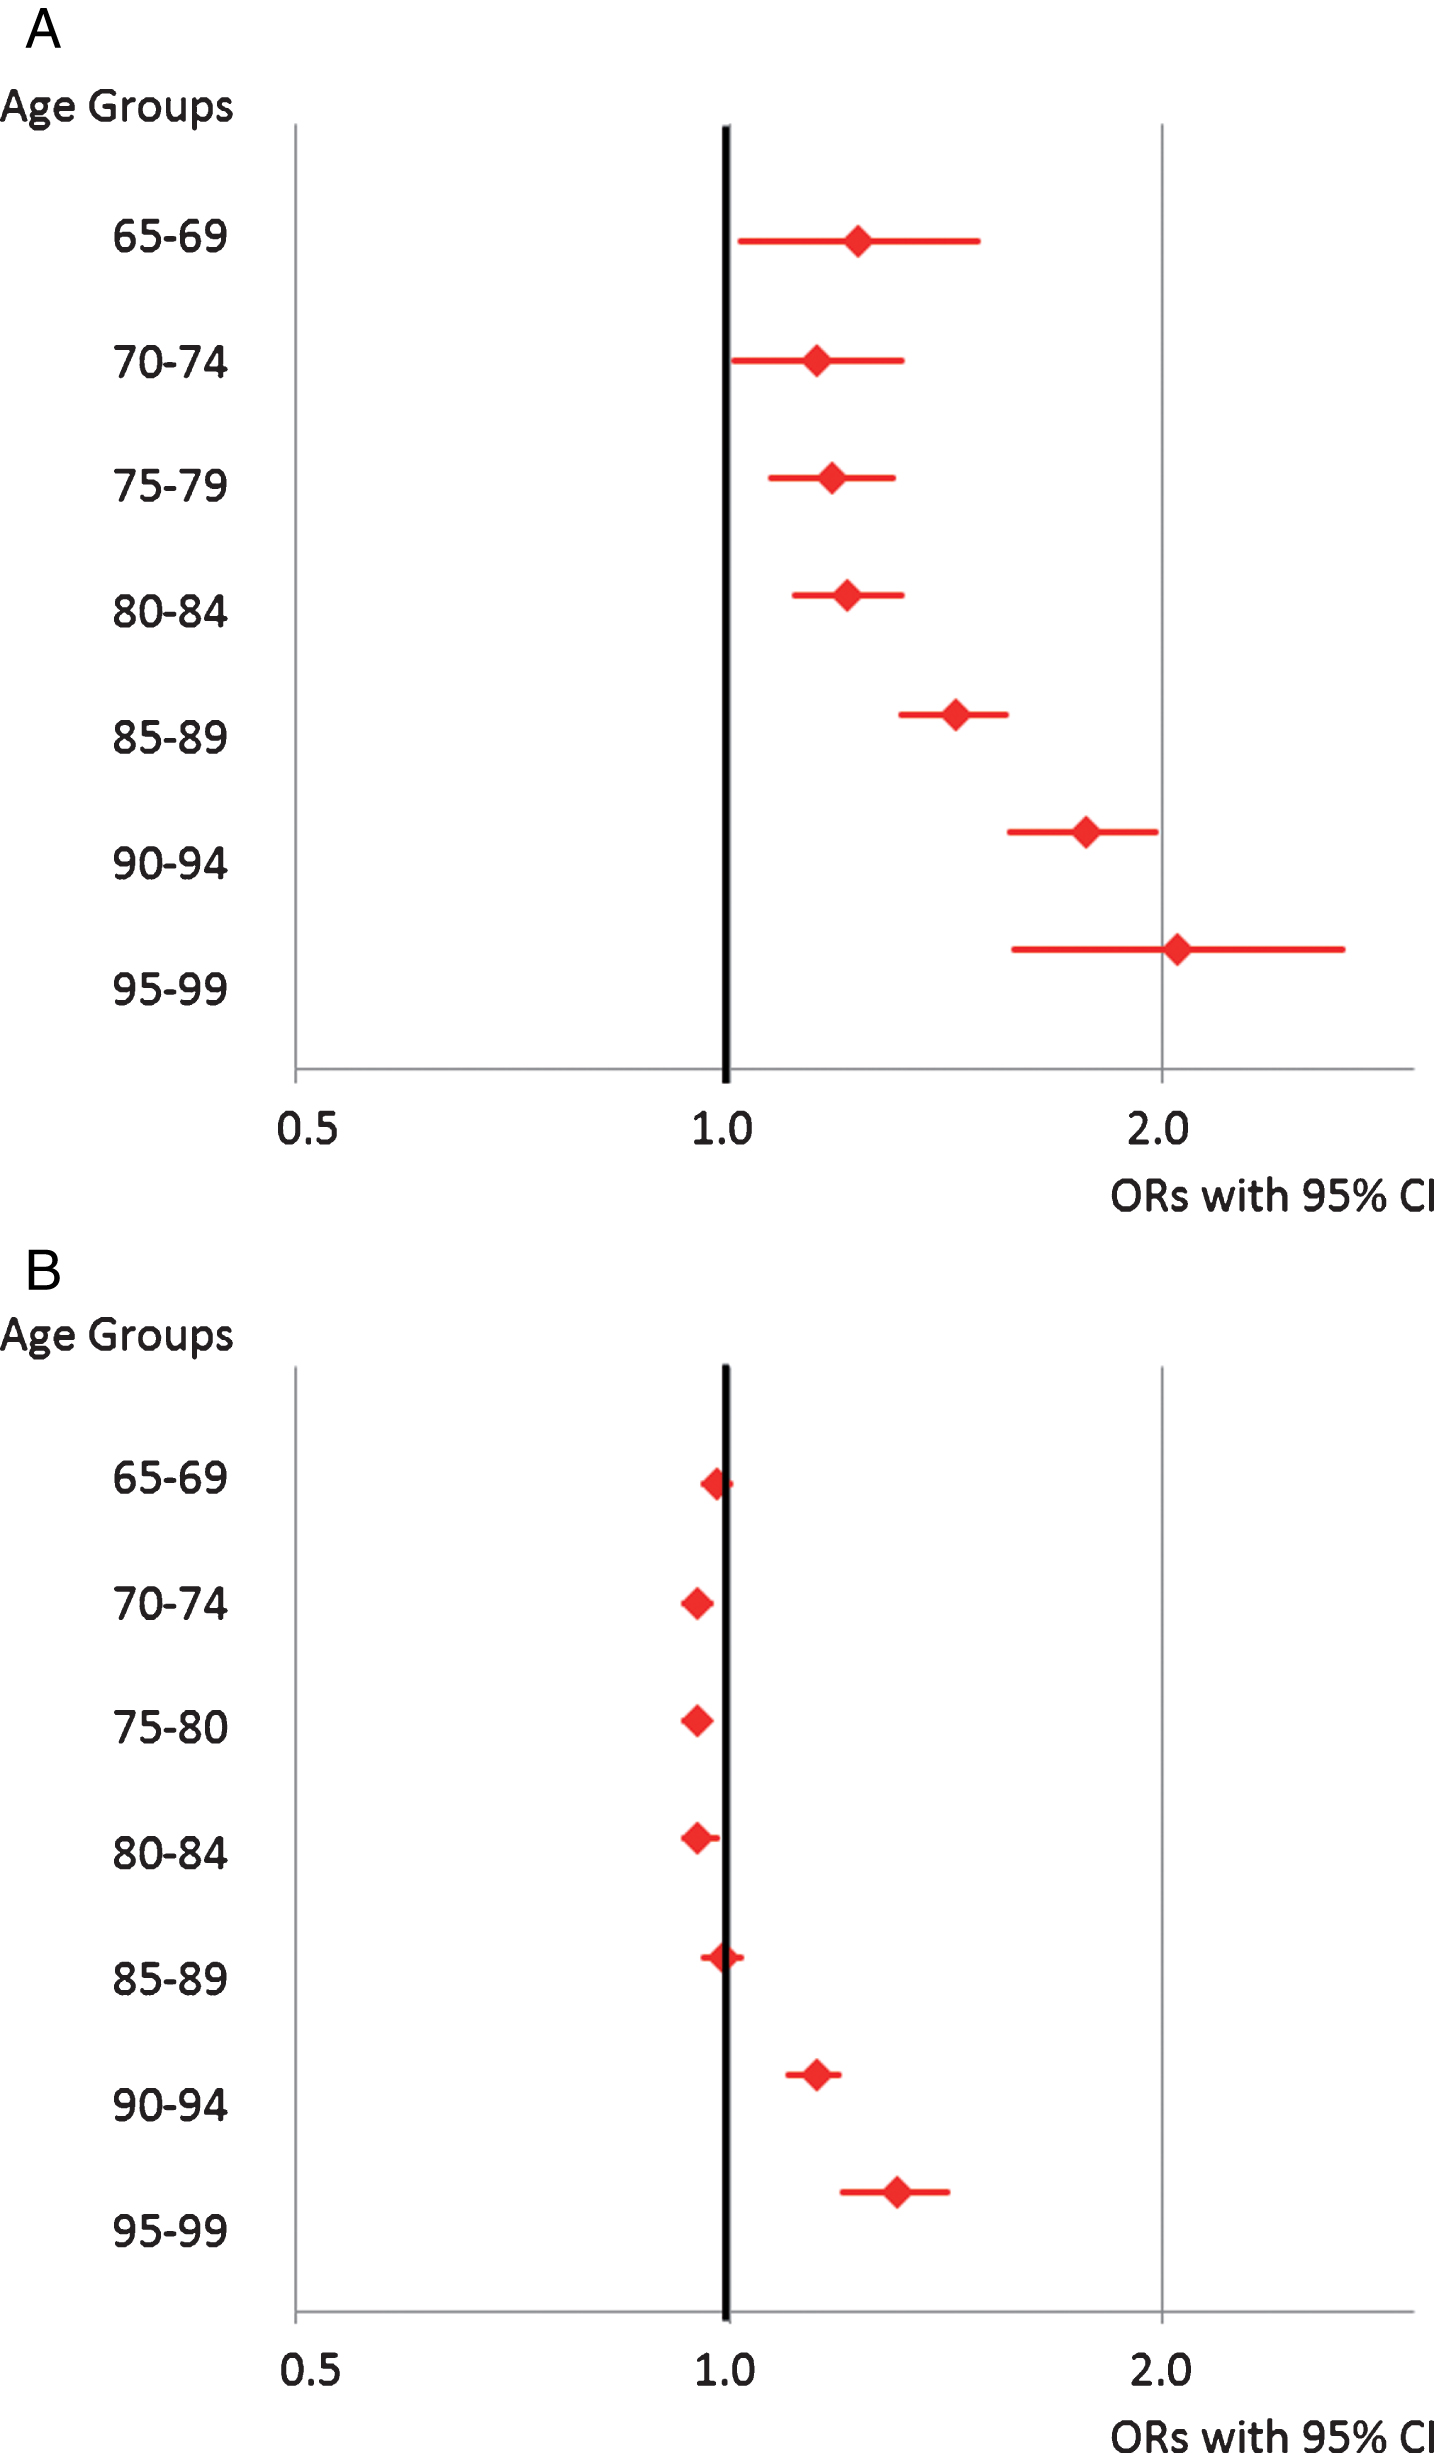 Changes in Opioid Use in Elderly with Dementia (A) and without Dementia (B). The figure shows the results of logistic regression analyses comparing 2000 versus 2015 in five-year age groups displaying adjusted odds ratios (ORs) and 95% confidence intervals (CI). The adjusted ORs include adjustment for age, sex, and all comorbidity.